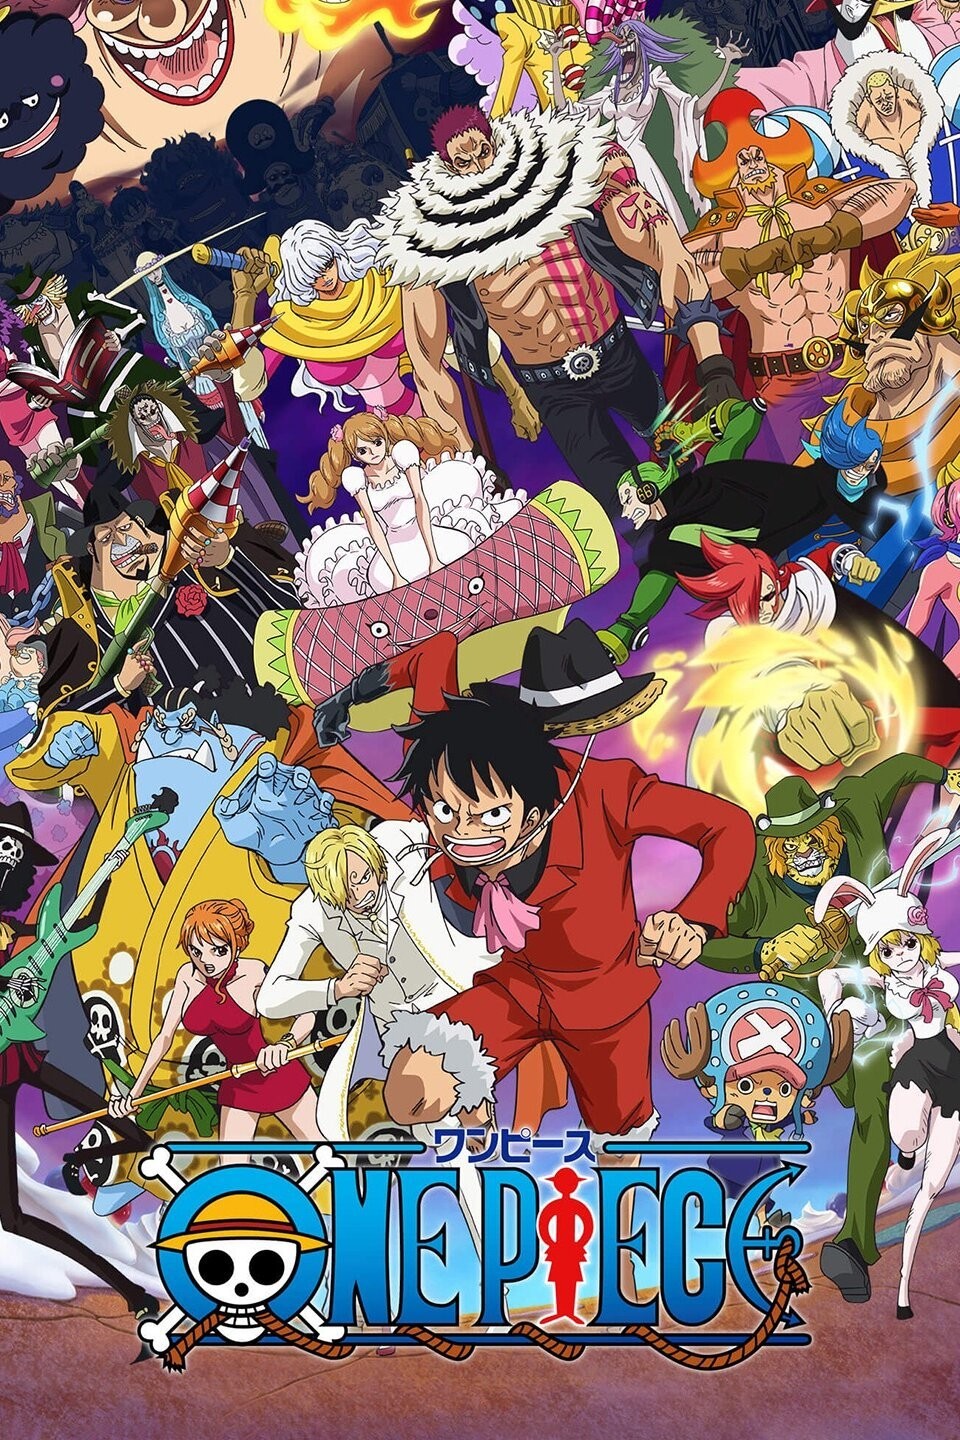 One Piece: Thriller Bark (326-384) (English Dub) The Straw Hat's Hard  Battles! a Pirate Soul Risking It All for the Flag! - Watch on Crunchyroll